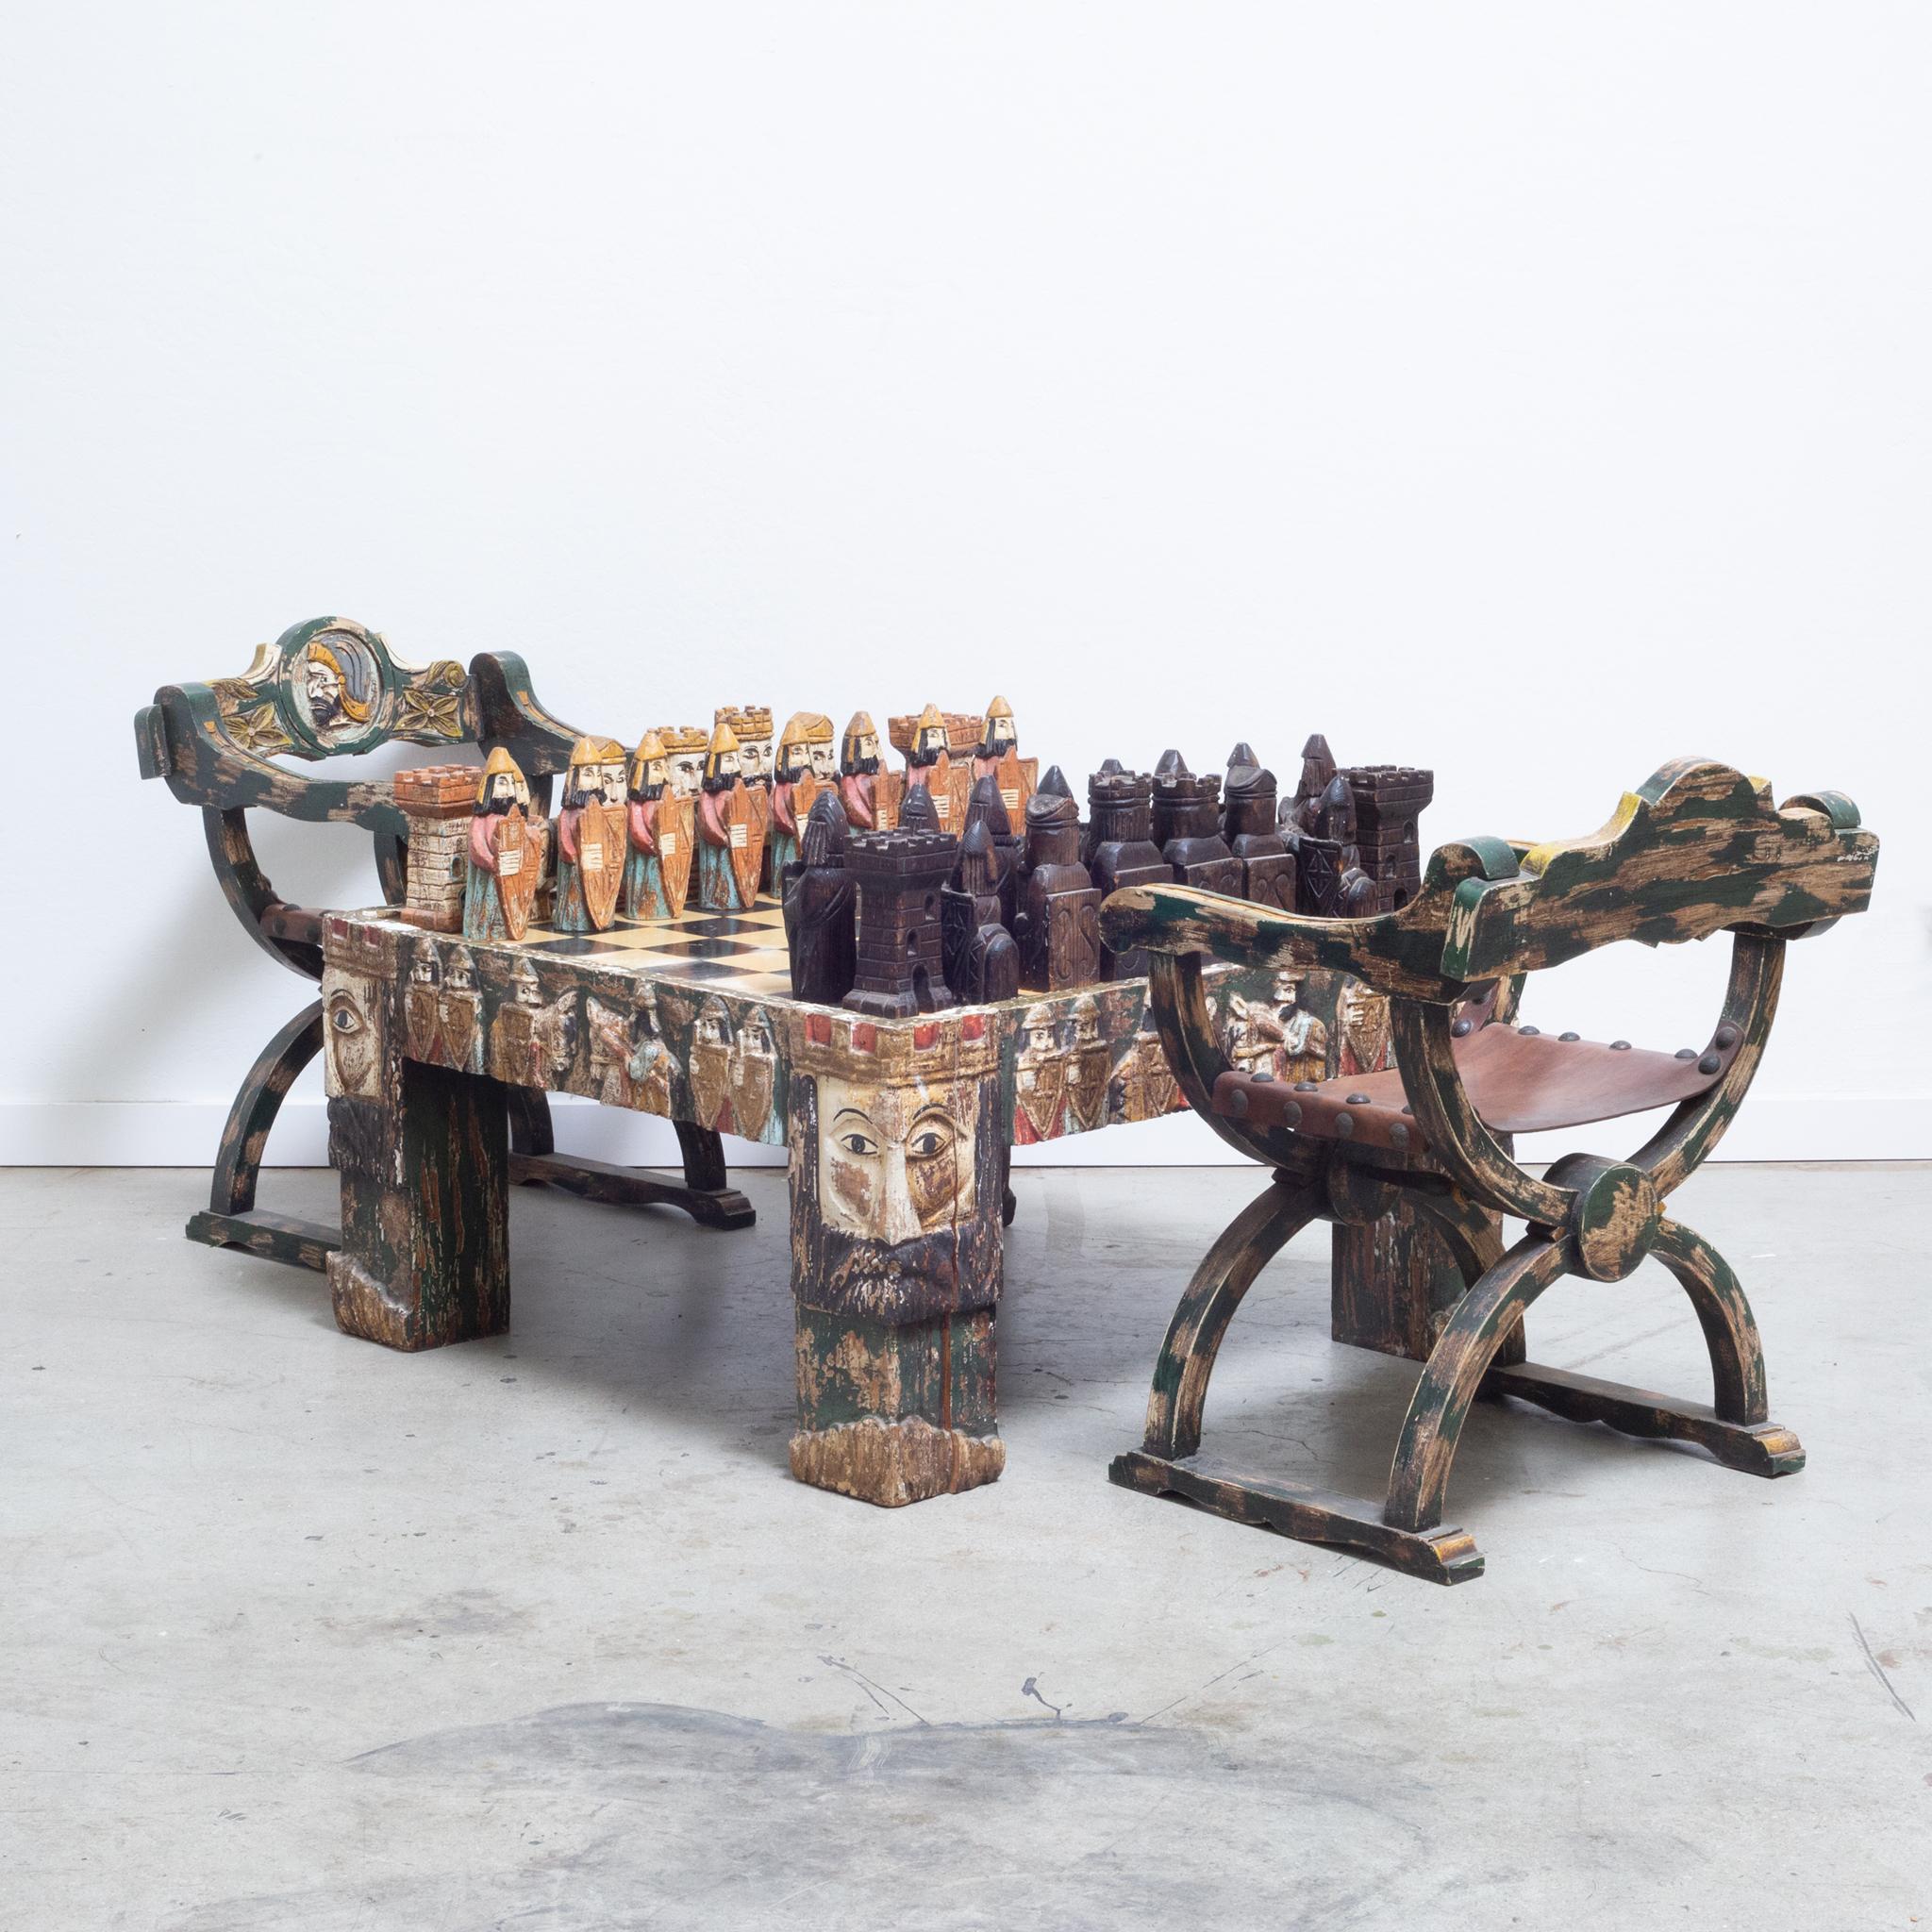 European Medieval style carved and polychromed chess table and game pieces,
Together with a like motif pair of curule chairs.

Mid-century chess coffee table, chess set and matching chairs. Italian polychrome and gesso hand carved coffee table with